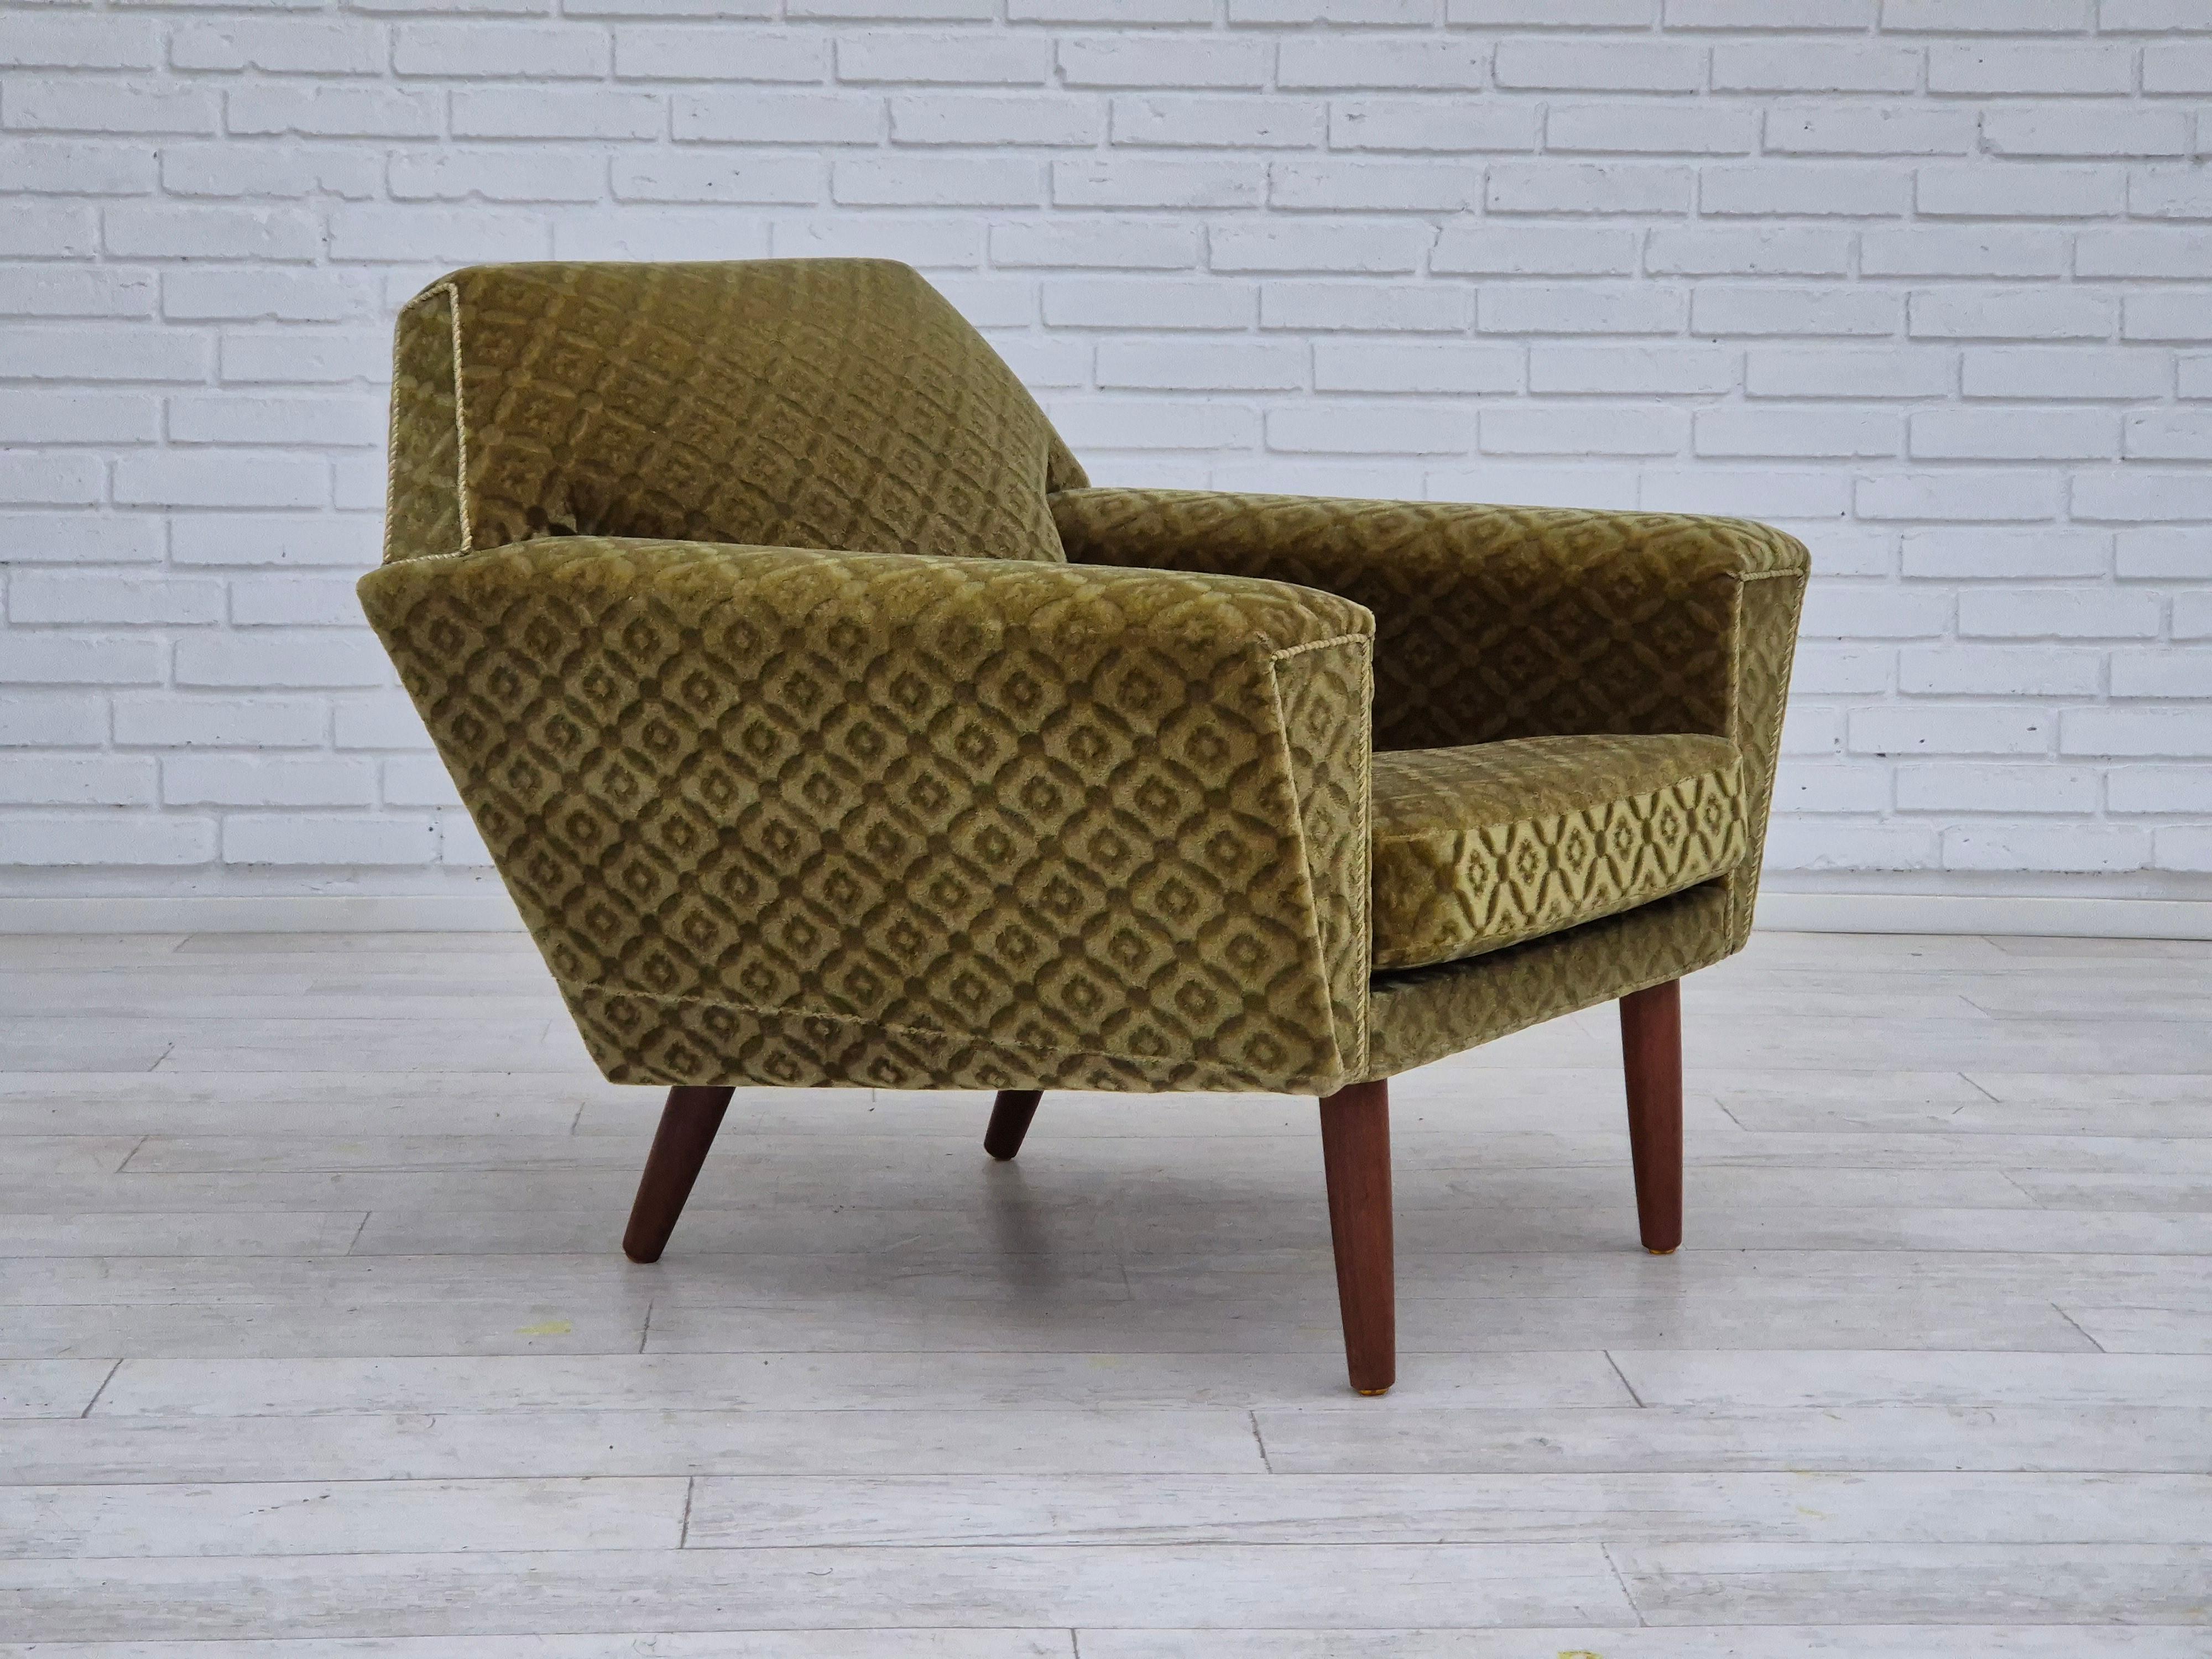 1970s, Danish armchair in original very good condition: no smells and no stains. Green furniture velour, teak wood legs. Springs in the seat cushion. Manufactured by Danish furniture manufacturer in about 1970s. Designed by Georg Thams for Vejen